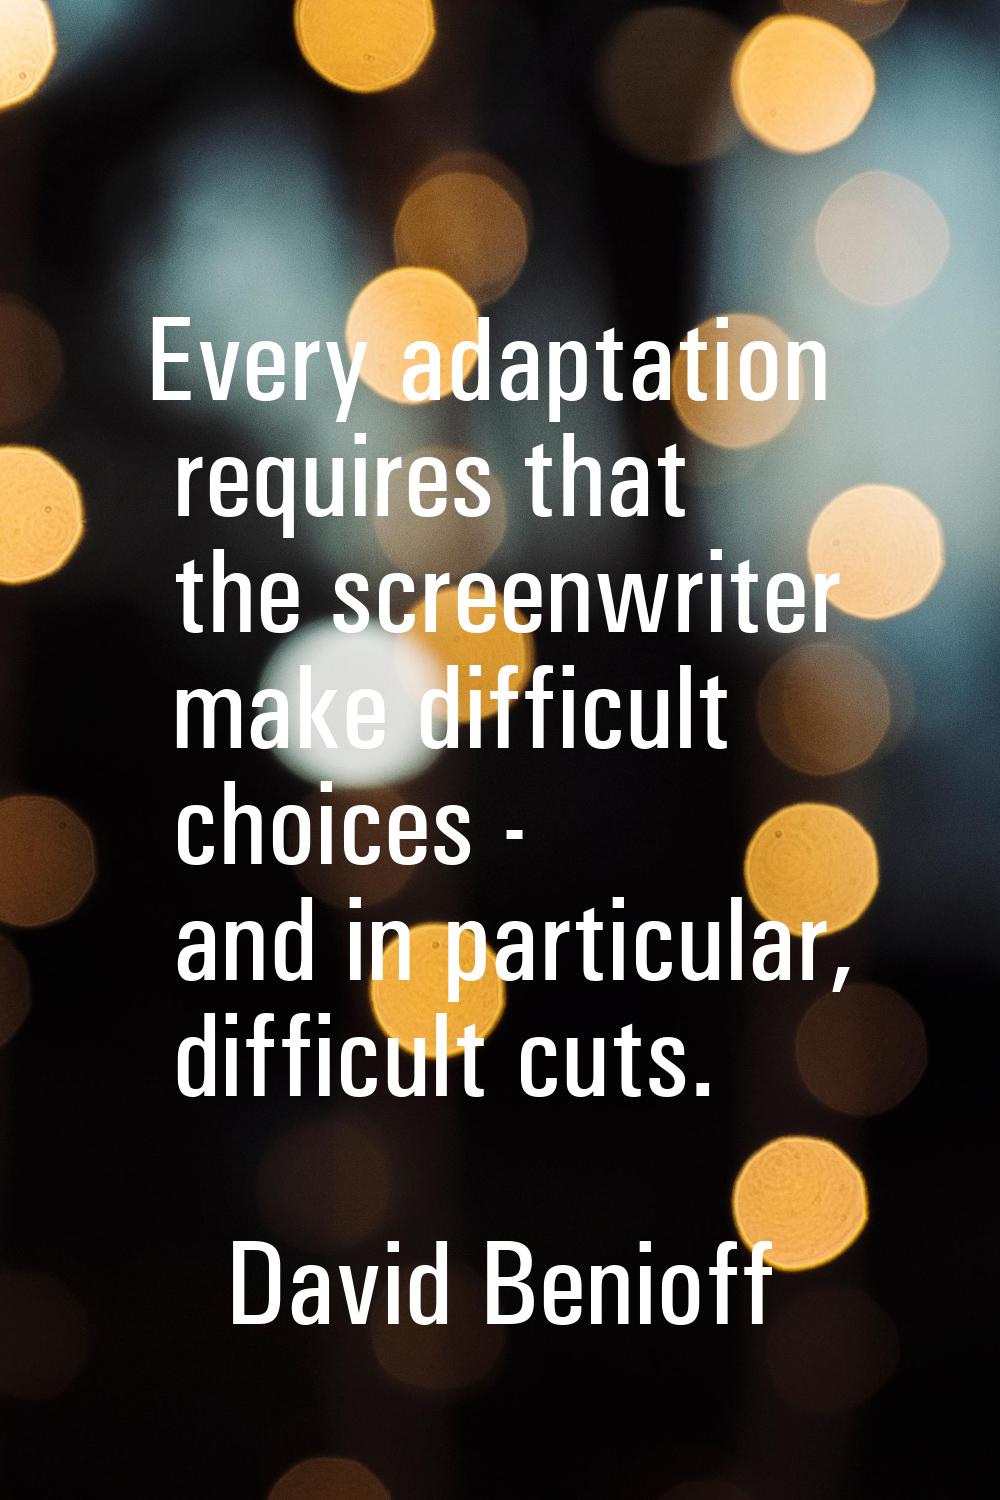 Every adaptation requires that the screenwriter make difficult choices - and in particular, difficu